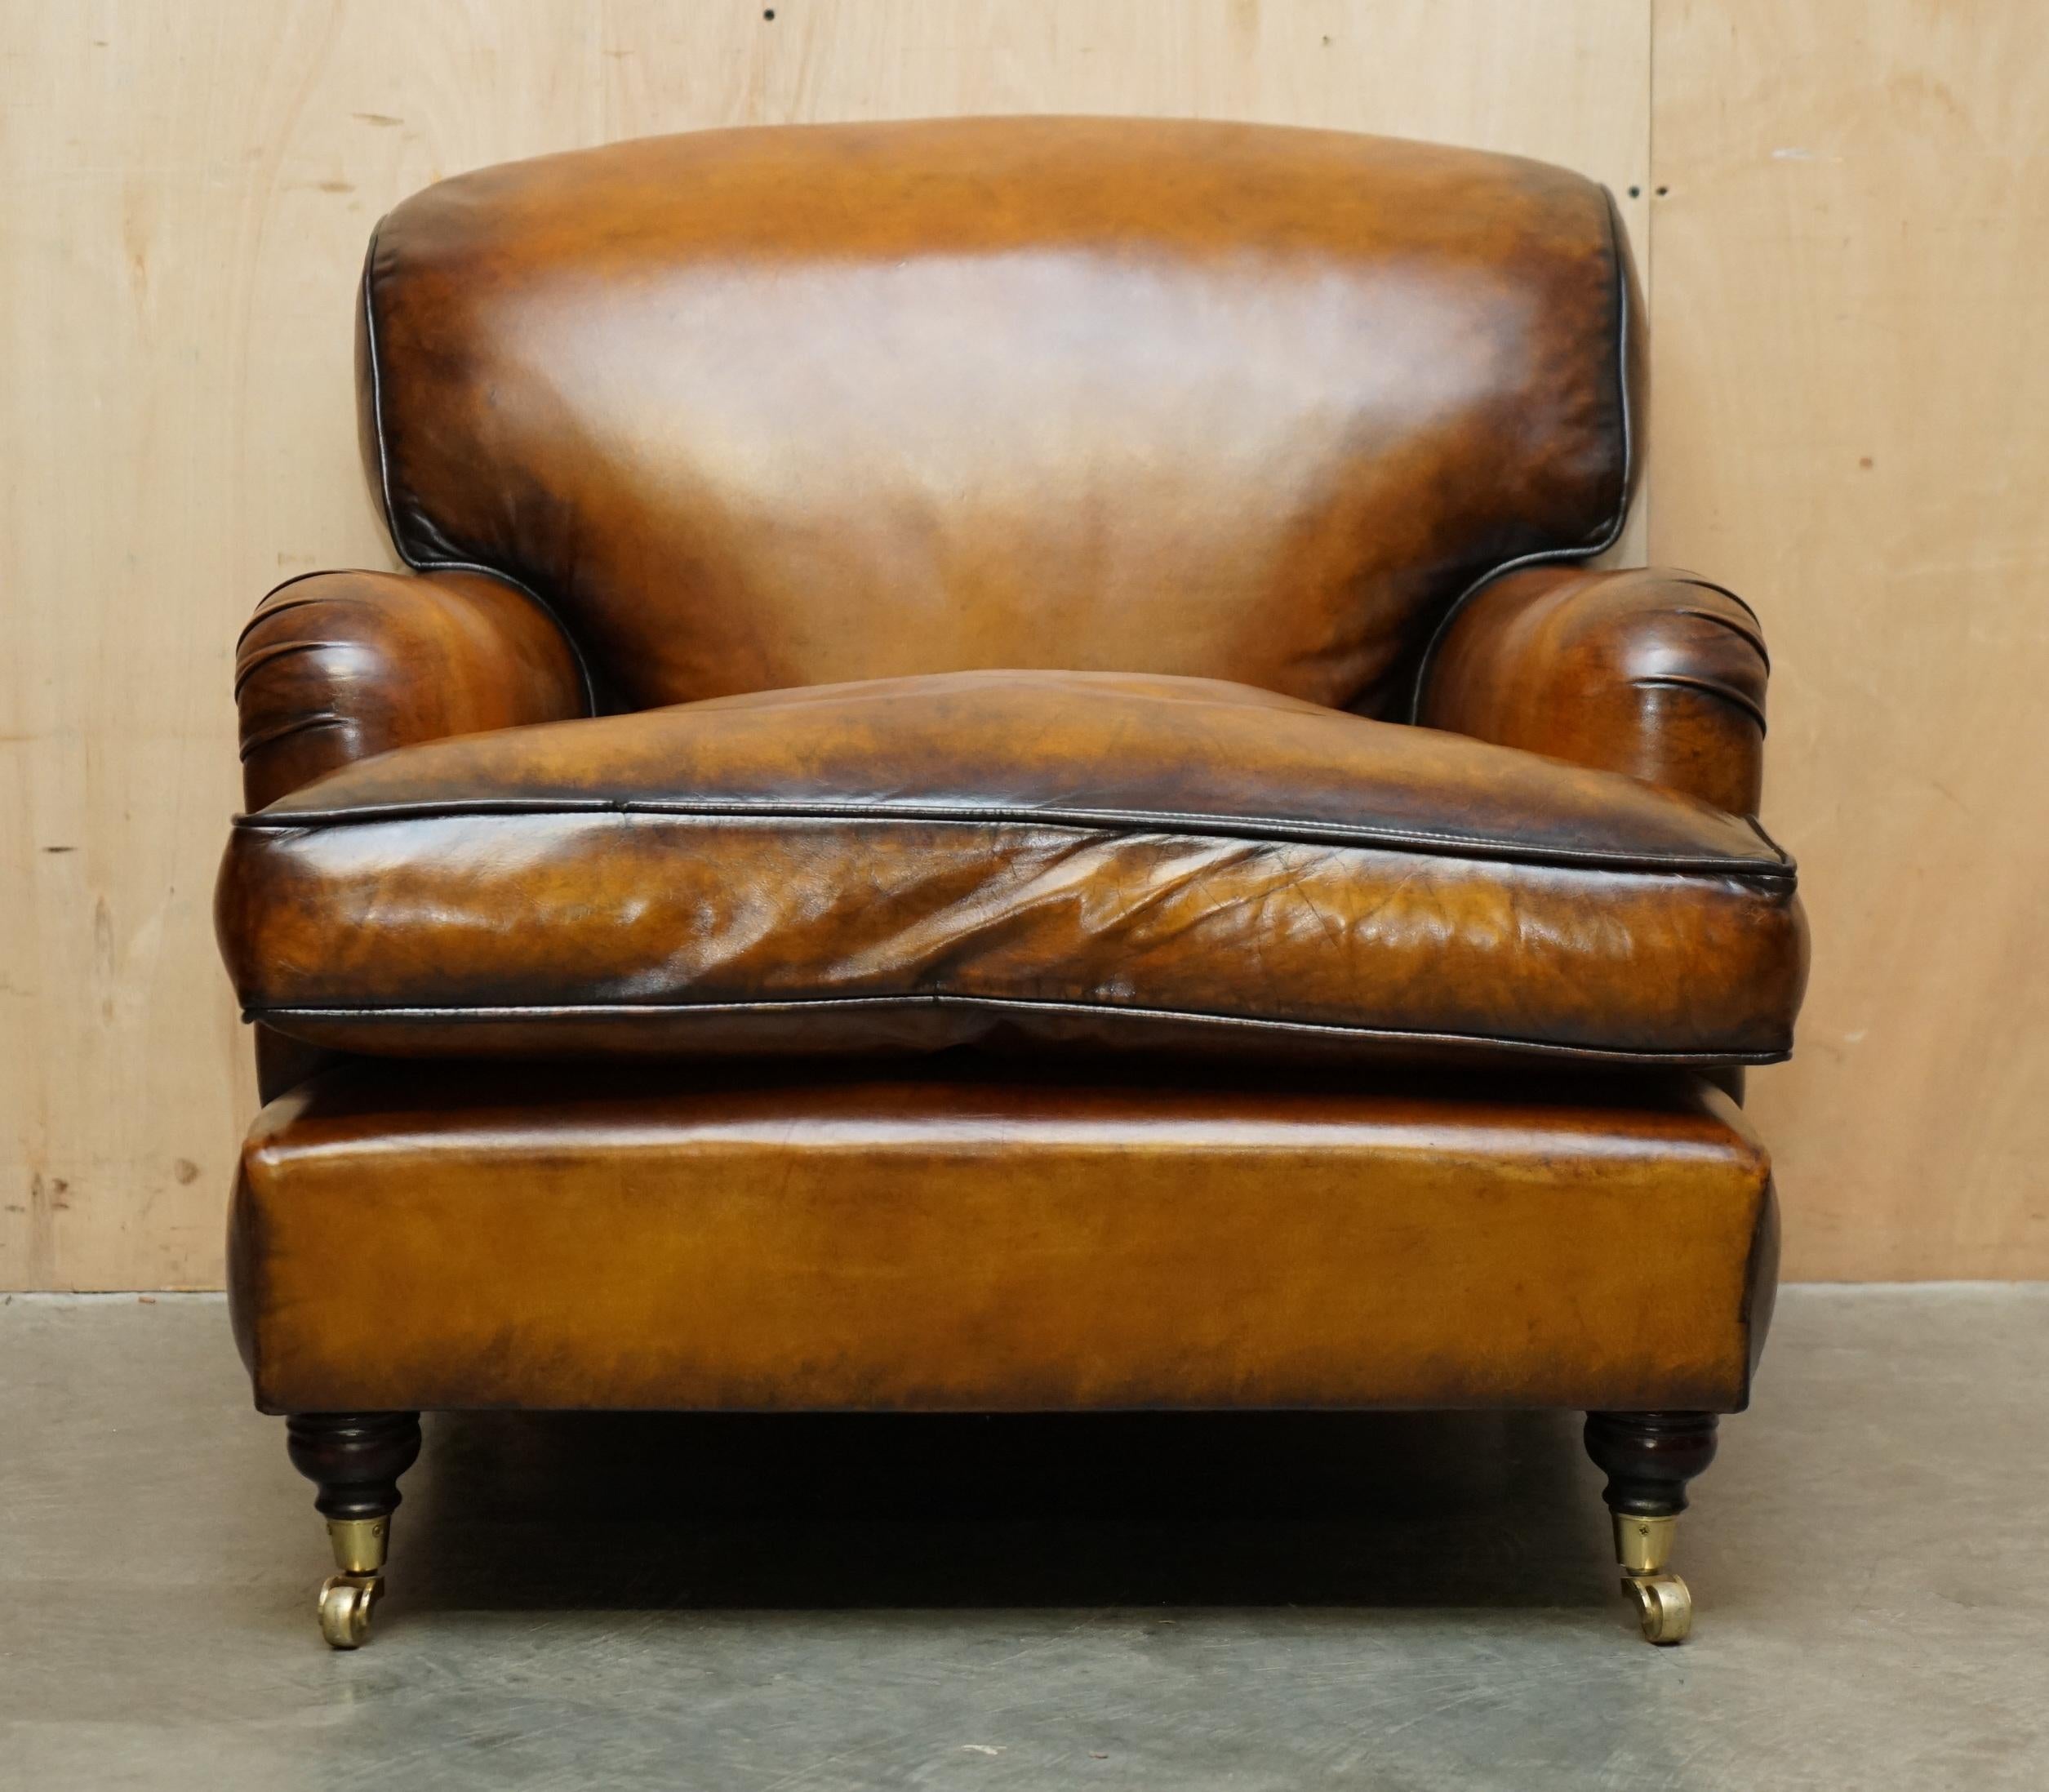 Royal House Antiques

Royal House Antiques is delighted to offer for sale this lovely vintage fully restored hand dyed brown leather Howard & Son’s style armchair with overstuffed feather filled cushion which is part of a suite

Please note the